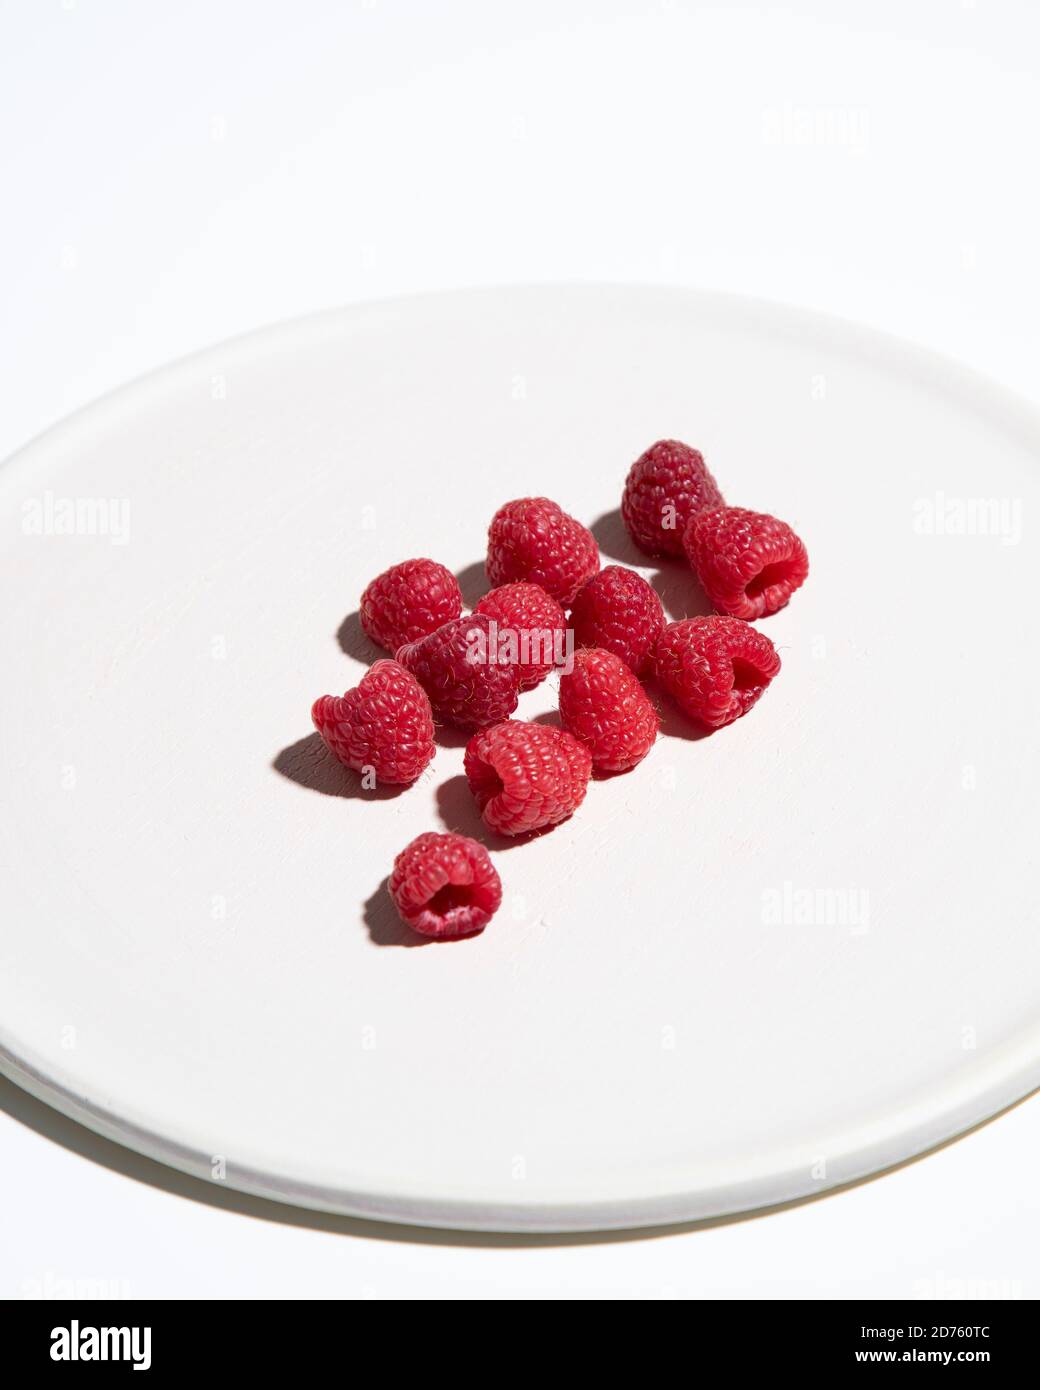 Raspberries on Cropped White Plate Stock Photo